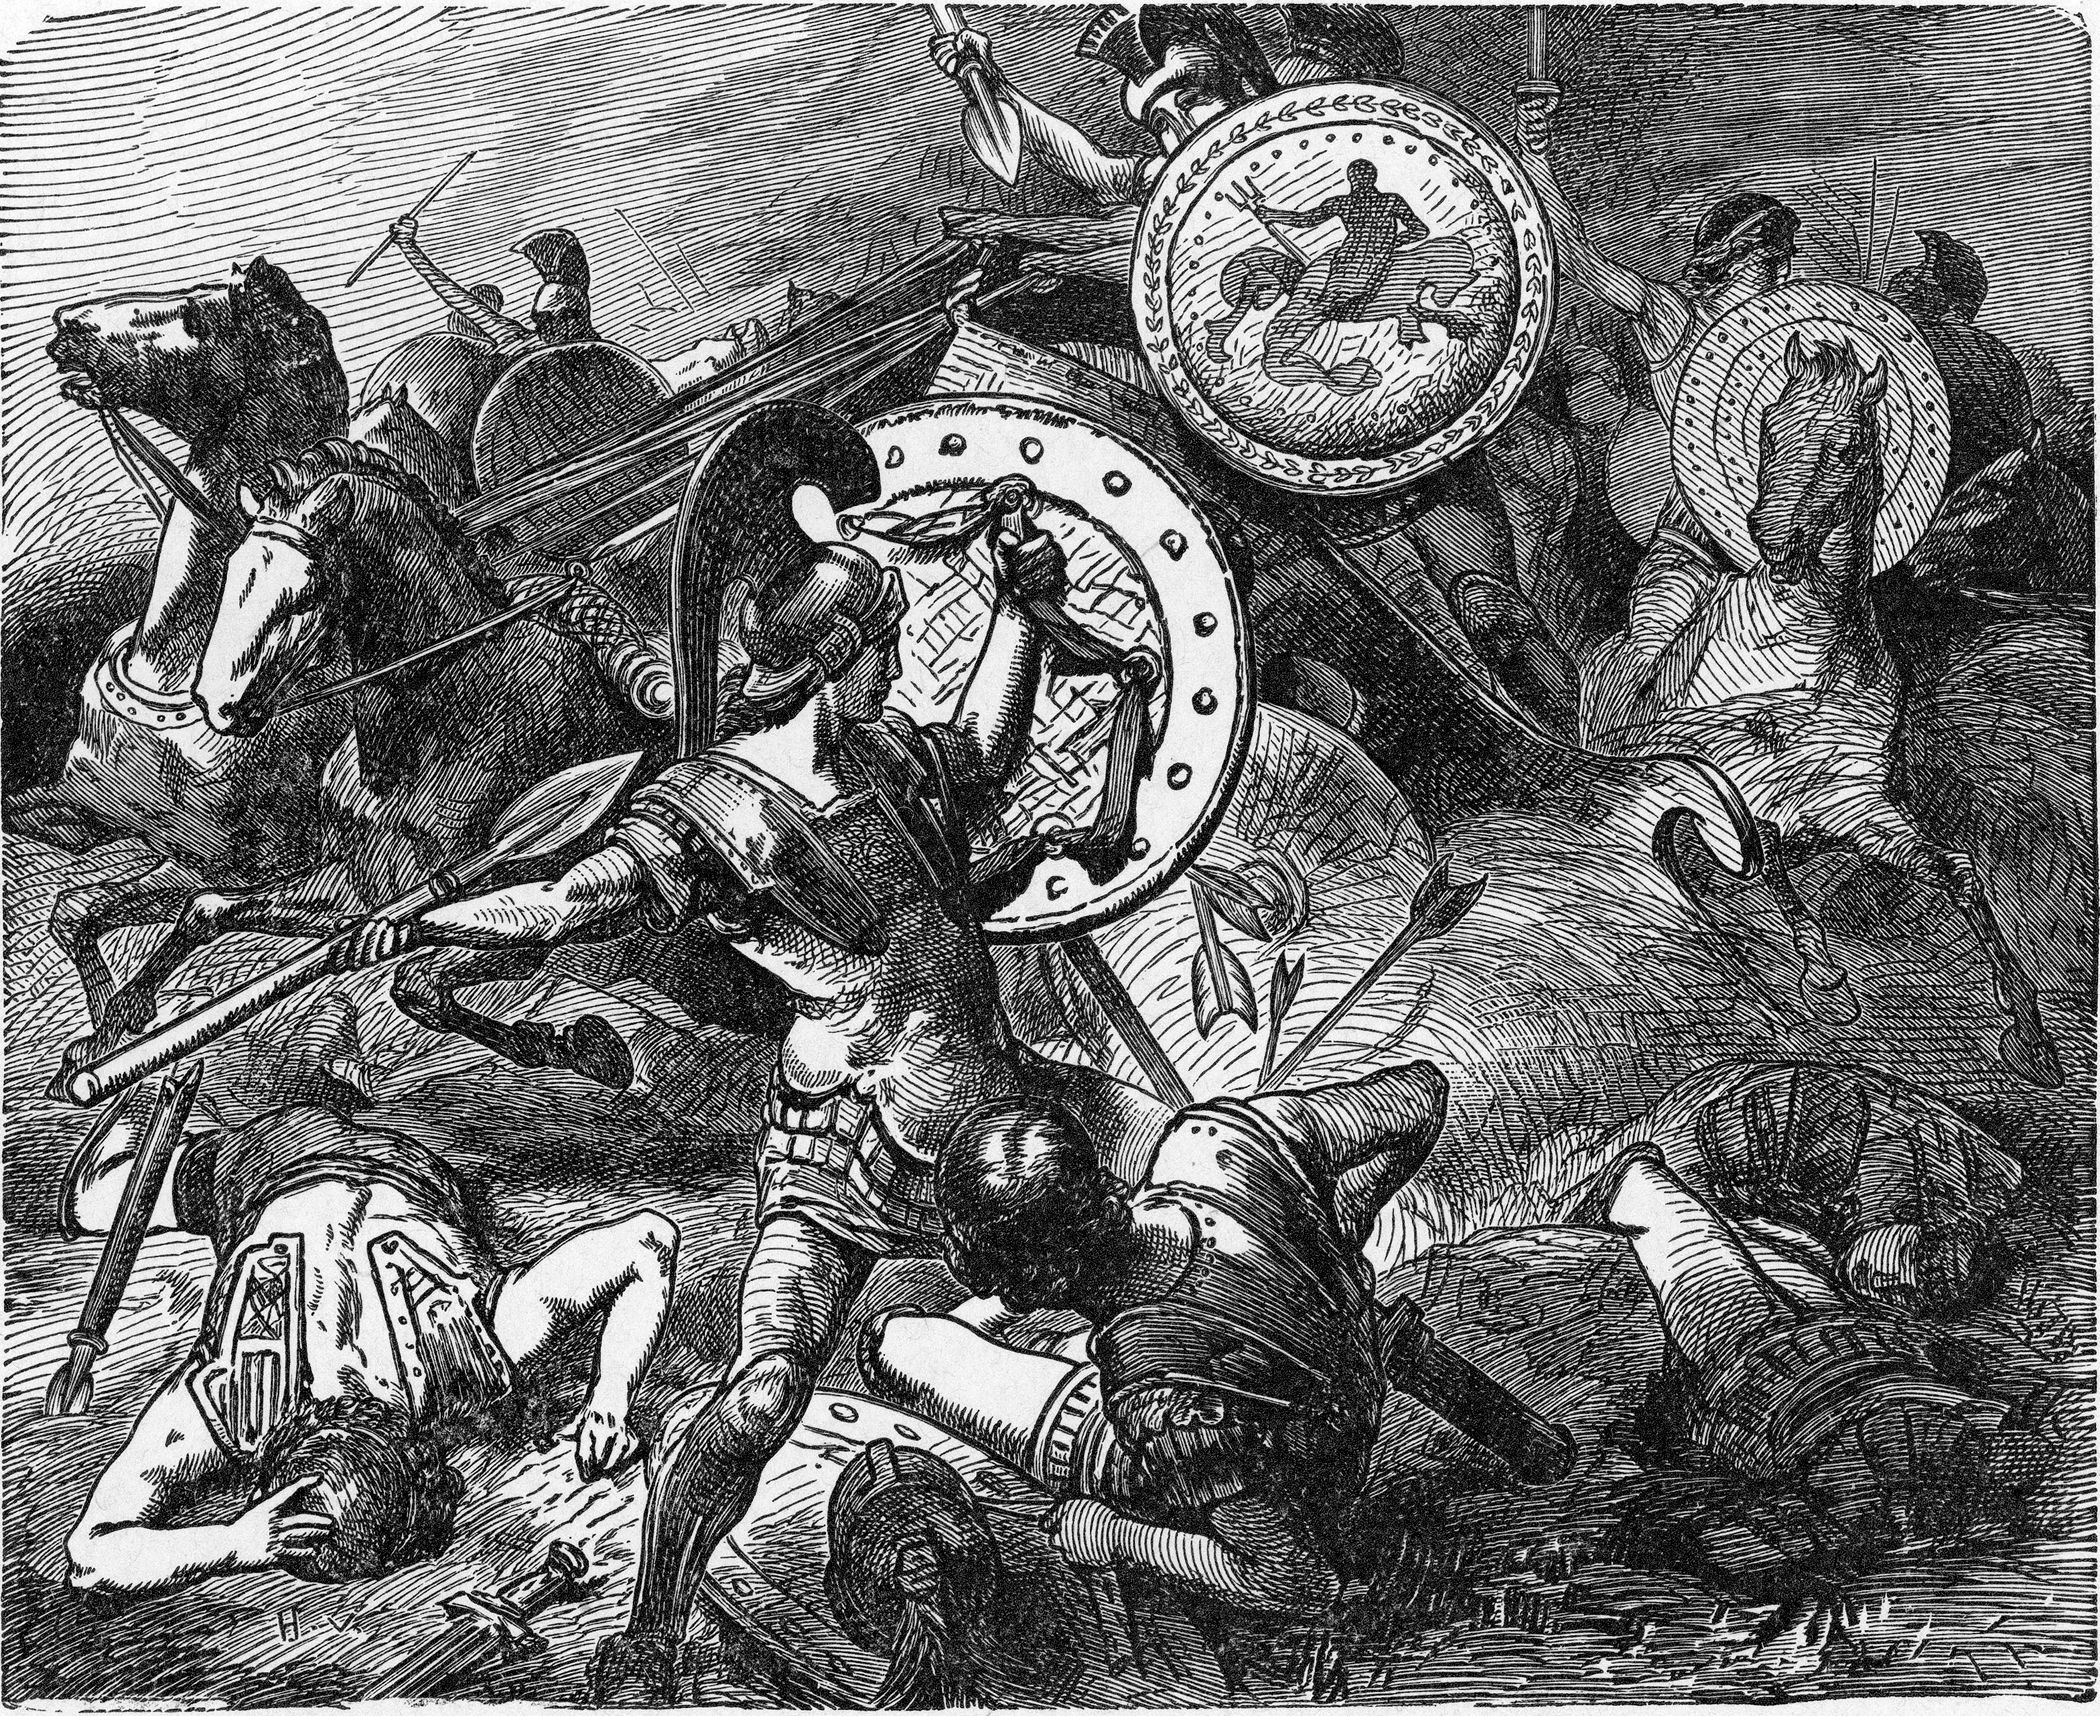 Theban general Epaminondas saves the life of fellow general Pelopidas during the victory over the Spartans at Leuctra in 371 bc.